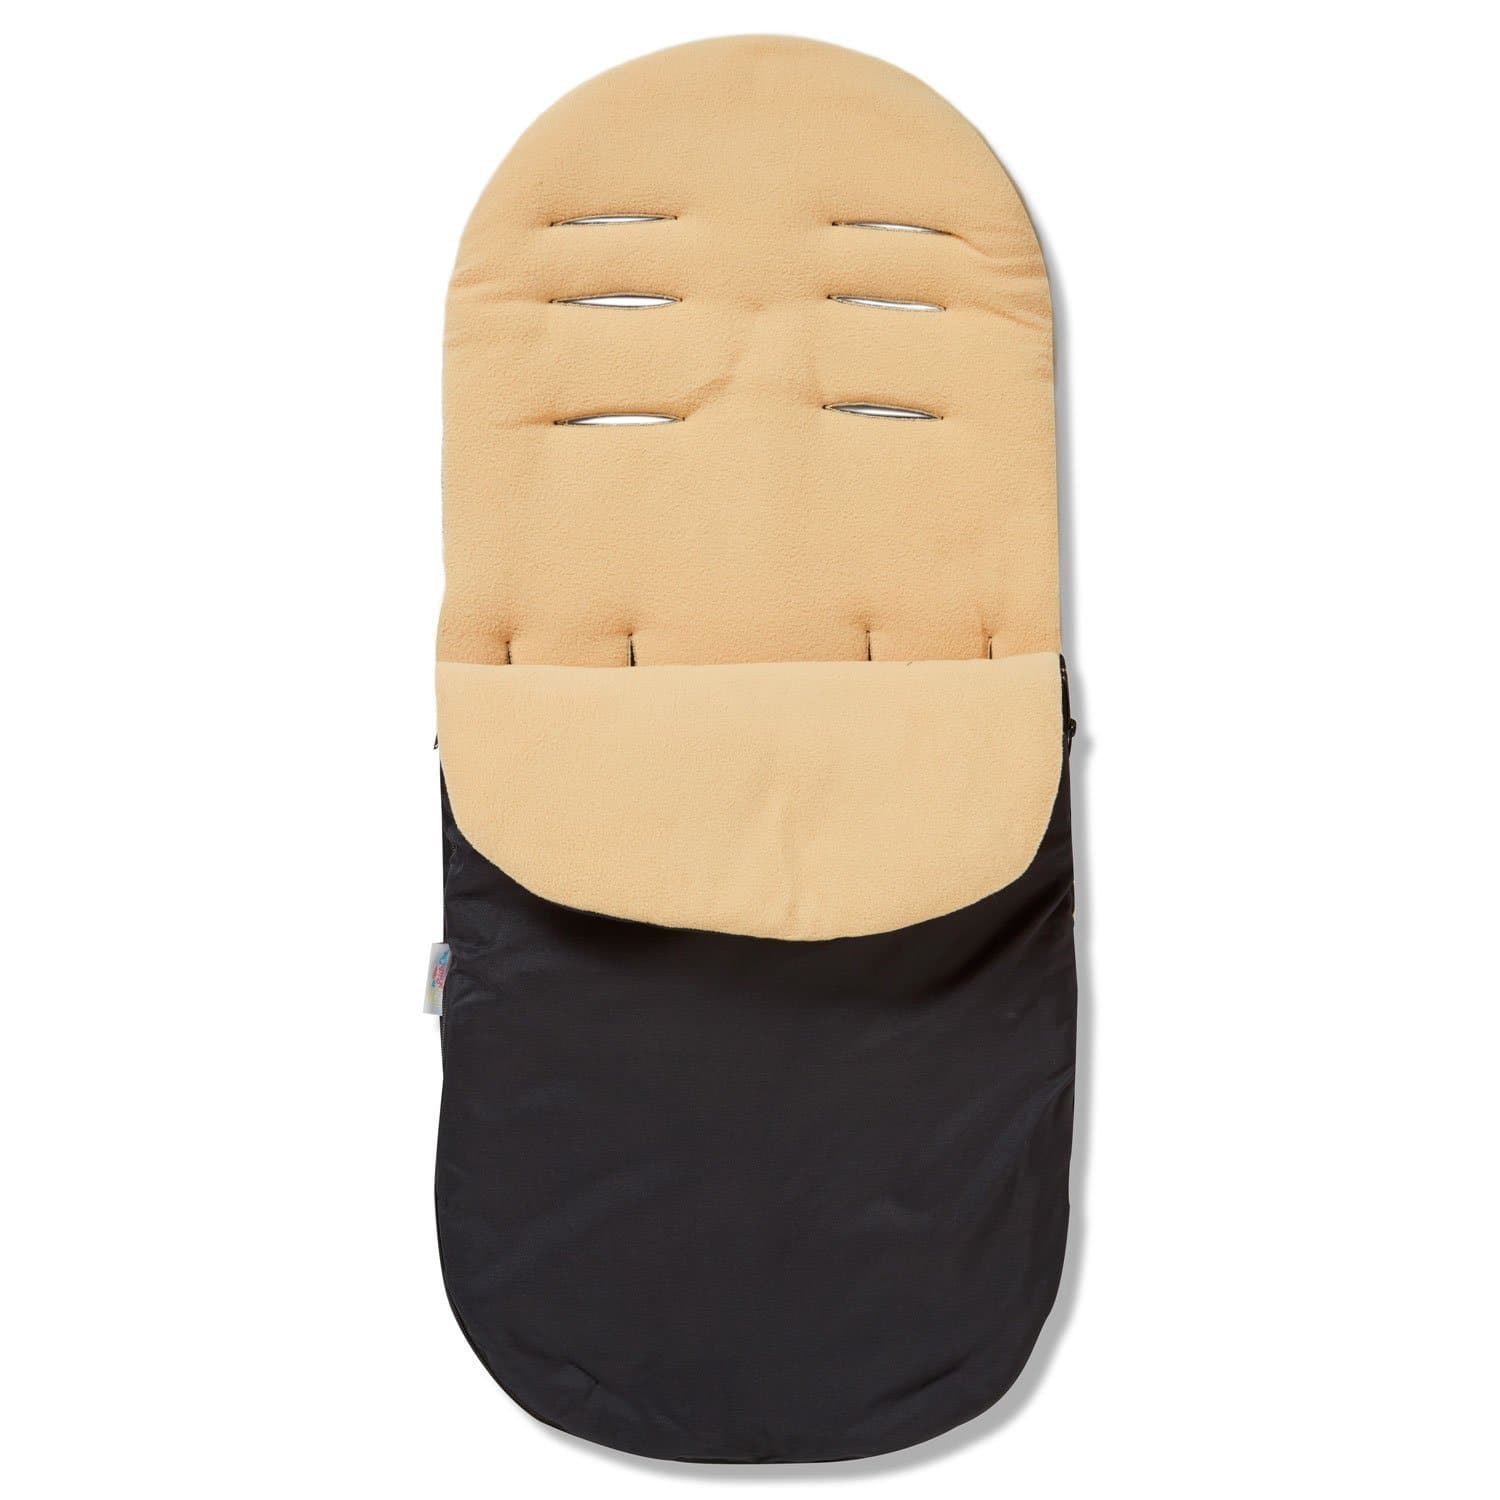 Footmuff / Cosy Toes Compatible with My Babiie - Sand / Fits All Models | For Your Little One